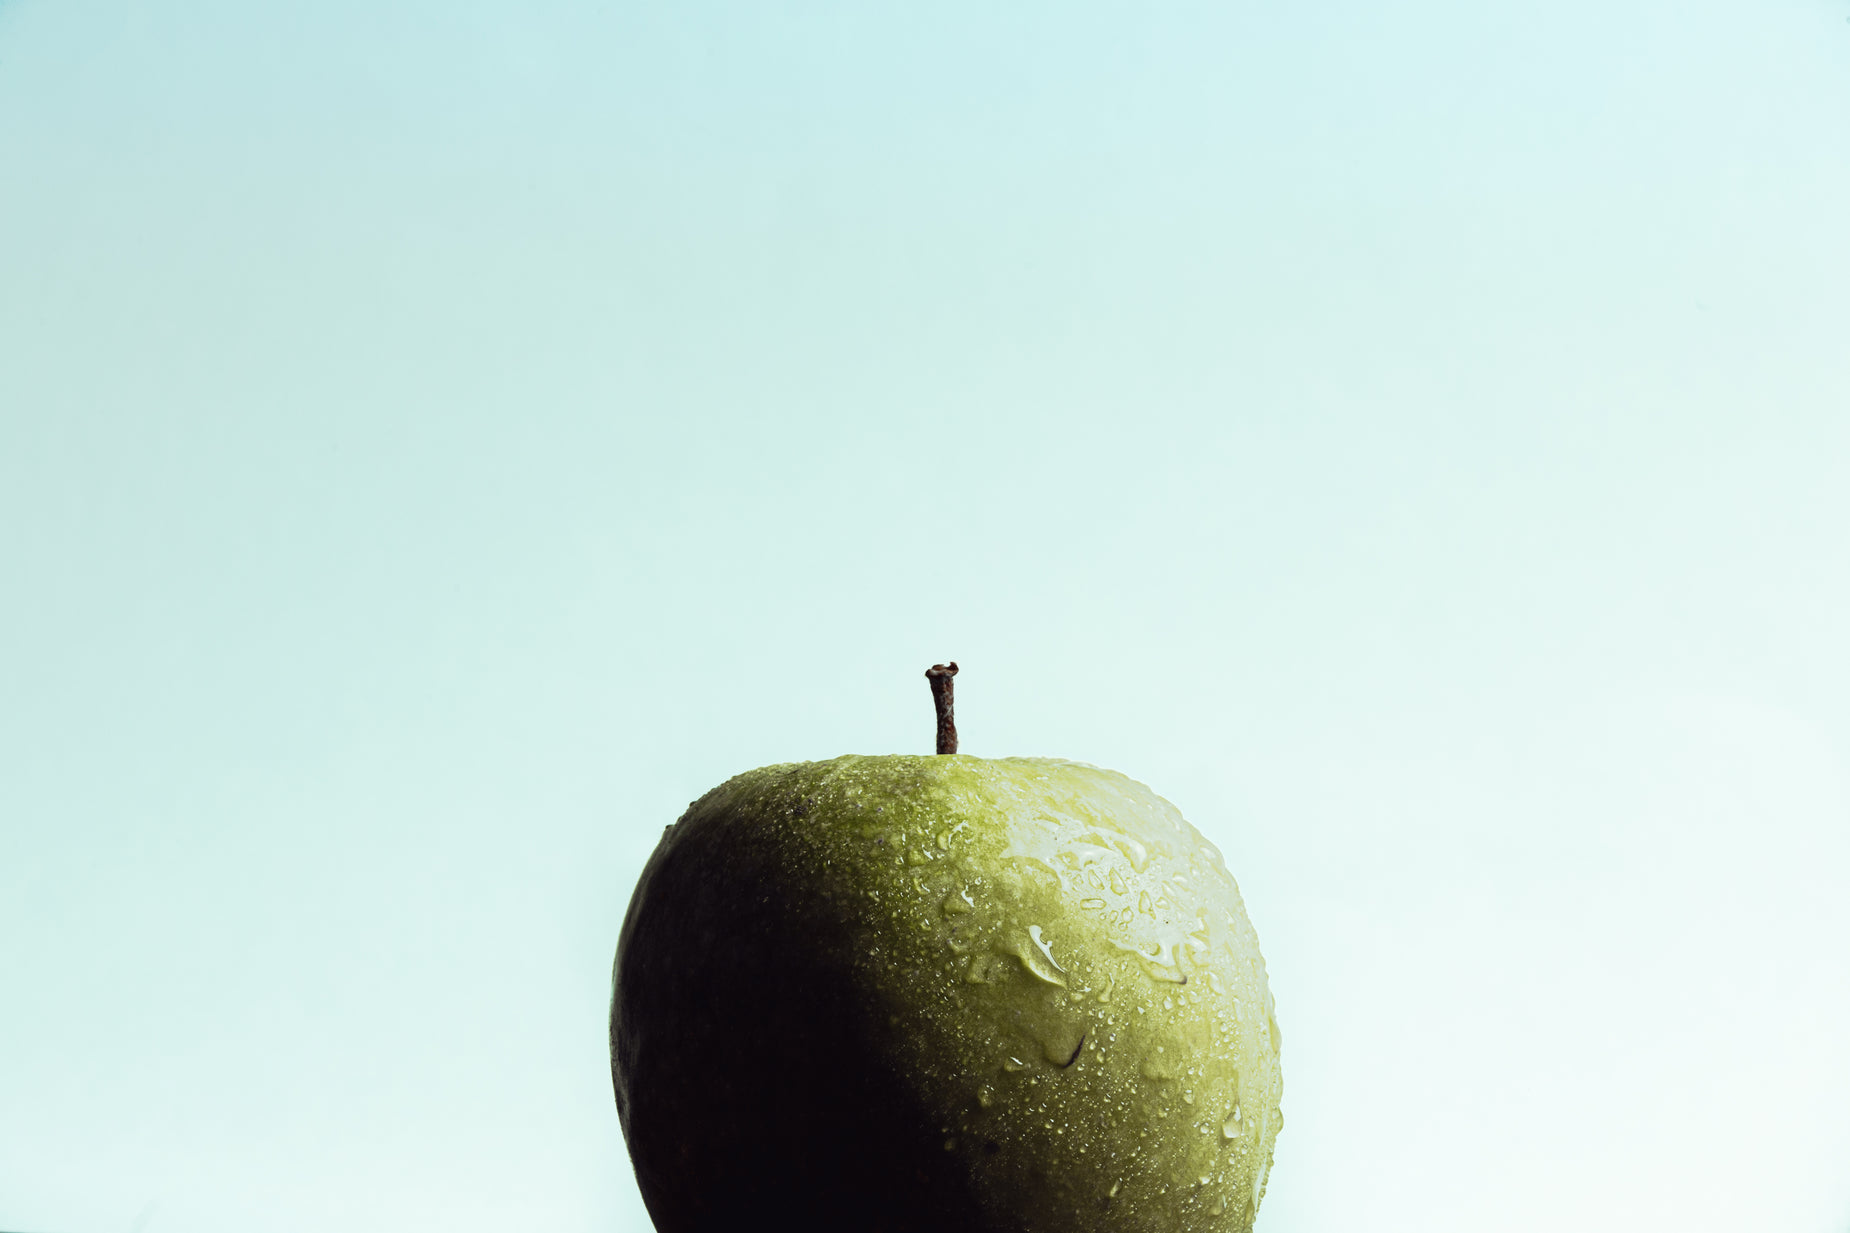 a close up of an apple with a sky background